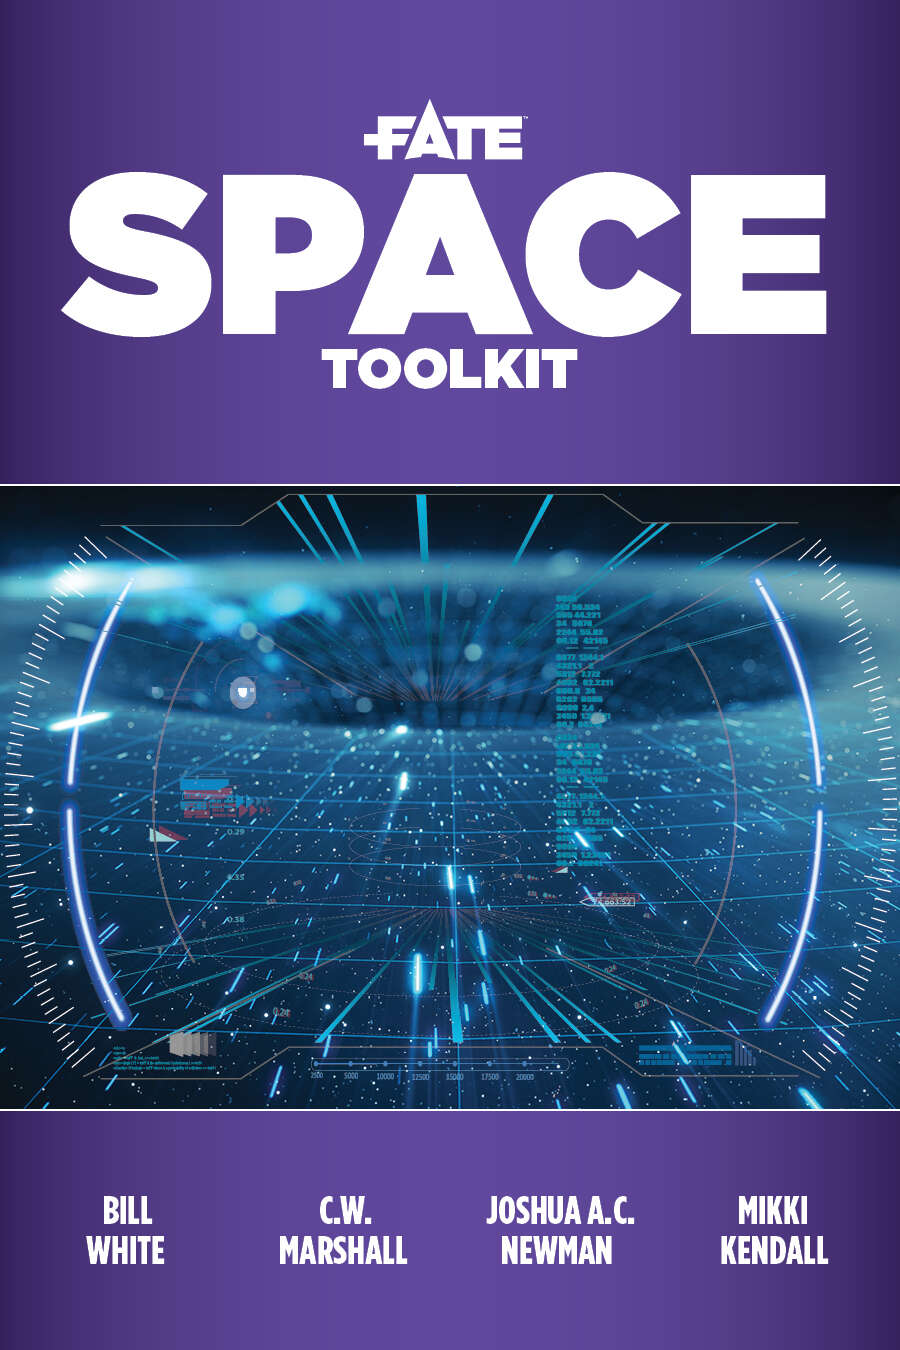 Bill White, Mikki Kendall, Joshua A.C. Newman, C.W. Marshall: Fate Space Toolkit (2019, Evil Hat Productions)